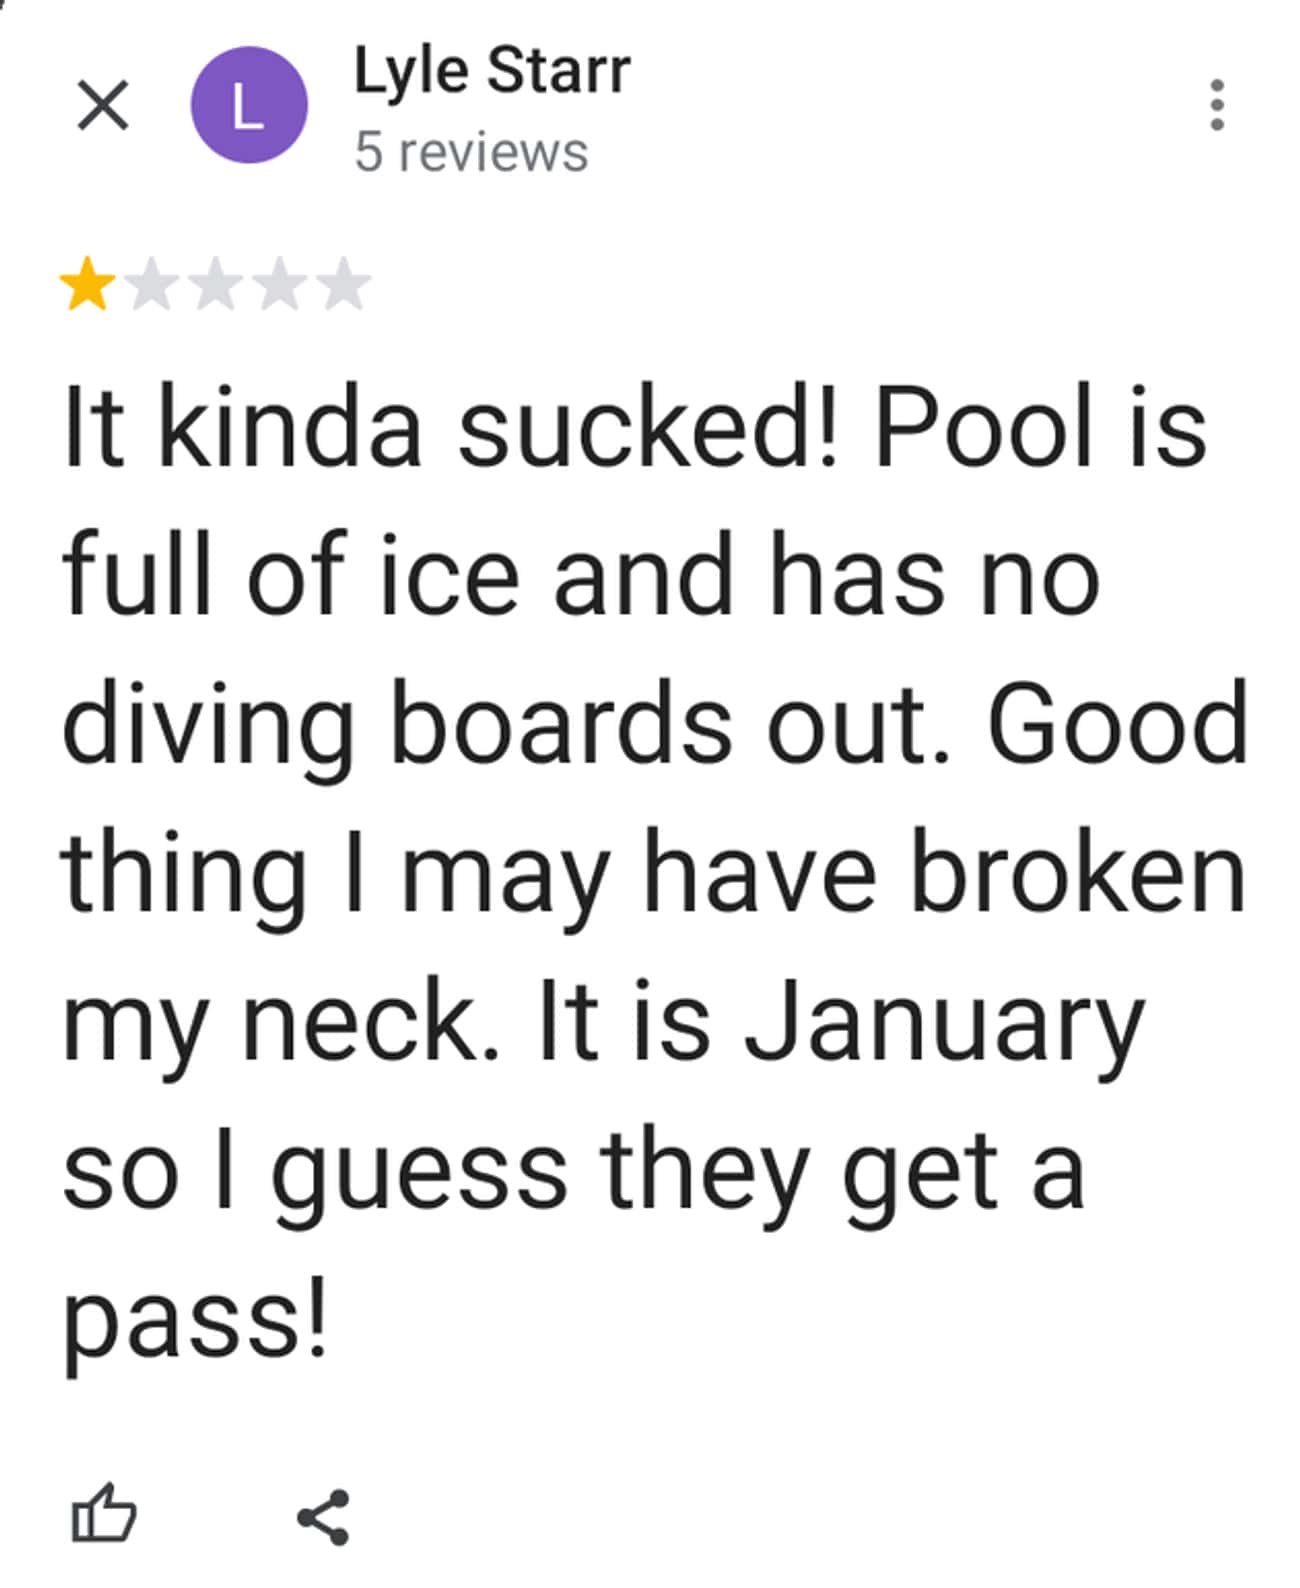 Angry That A Pool Has Ice... In January...